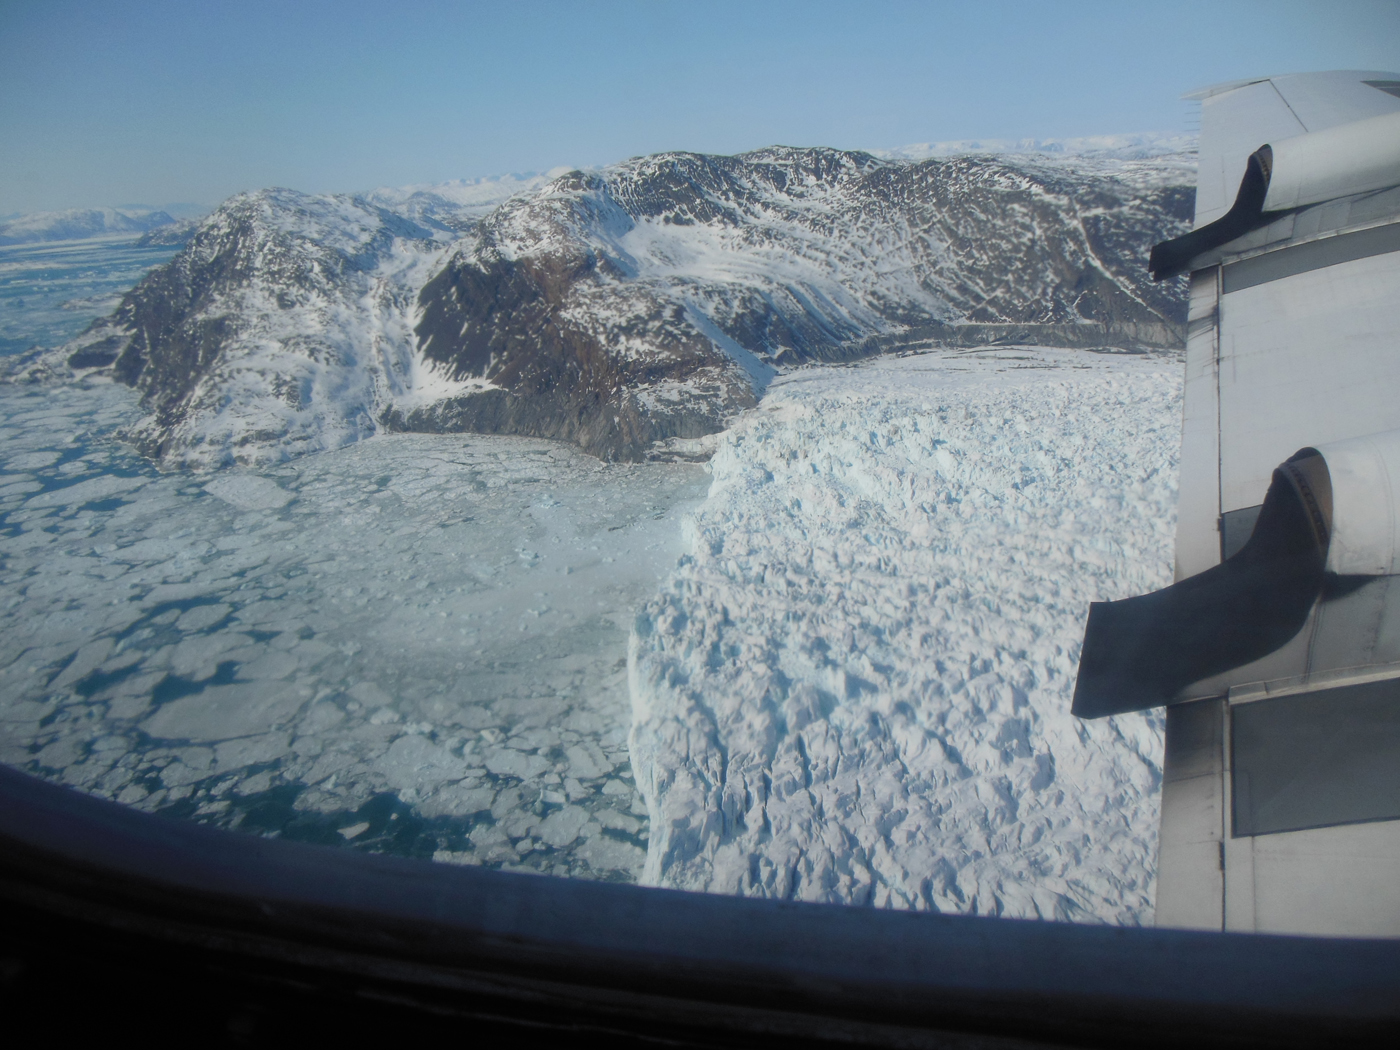 An image of a glacier’s calving front, where it flows and loses ice to the sea.